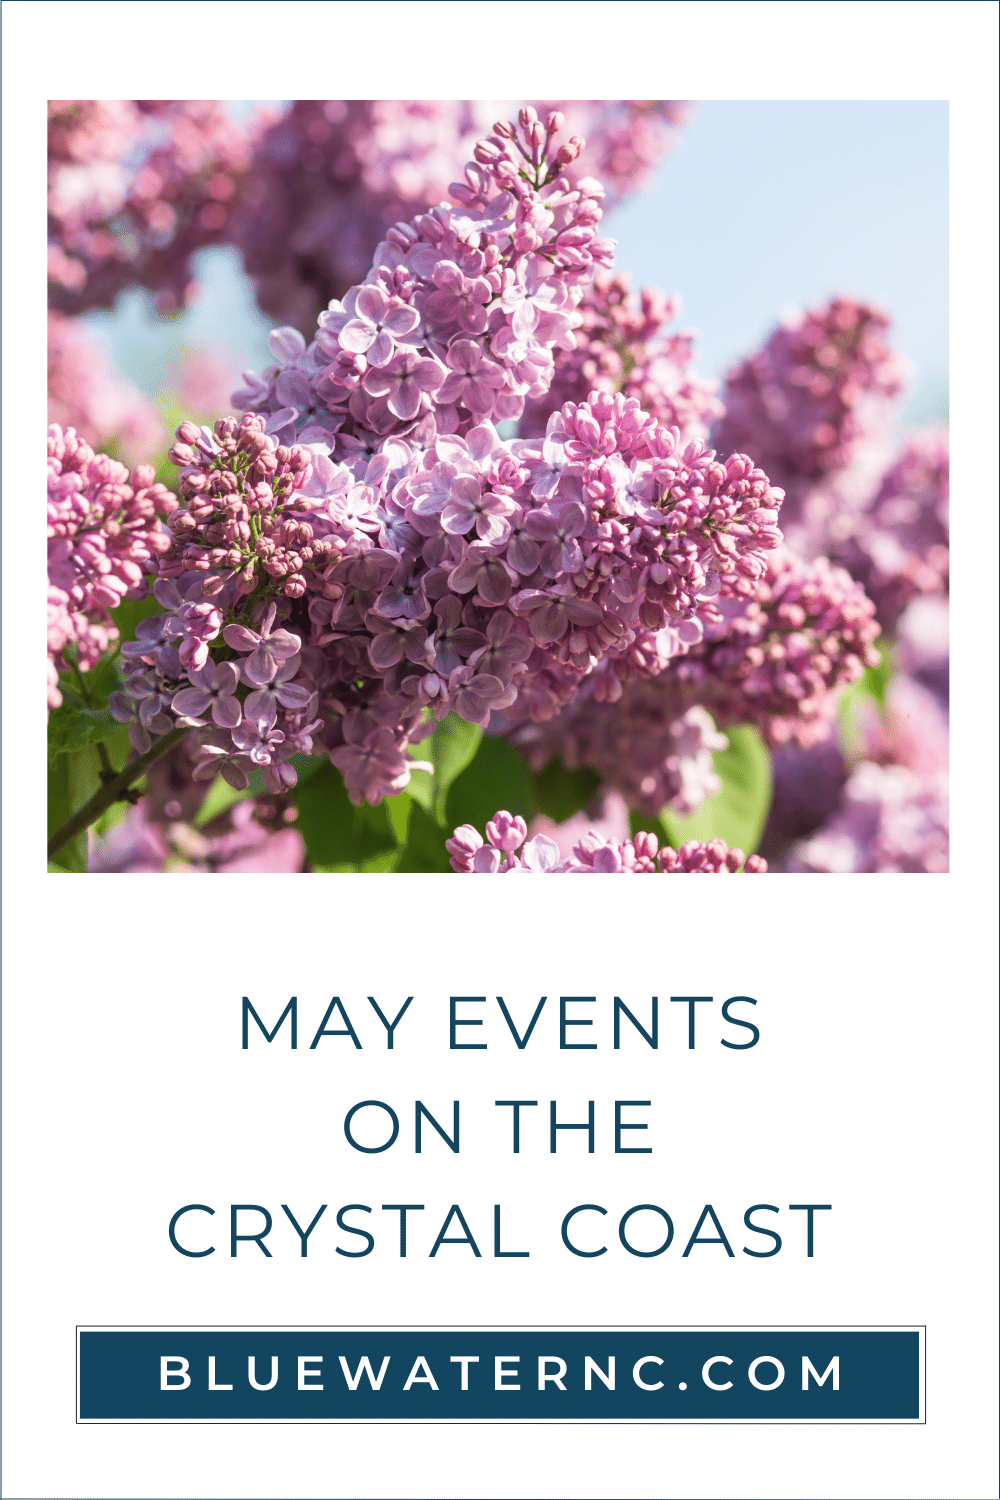 Save these May events on the Crystal Coast to plan your visit